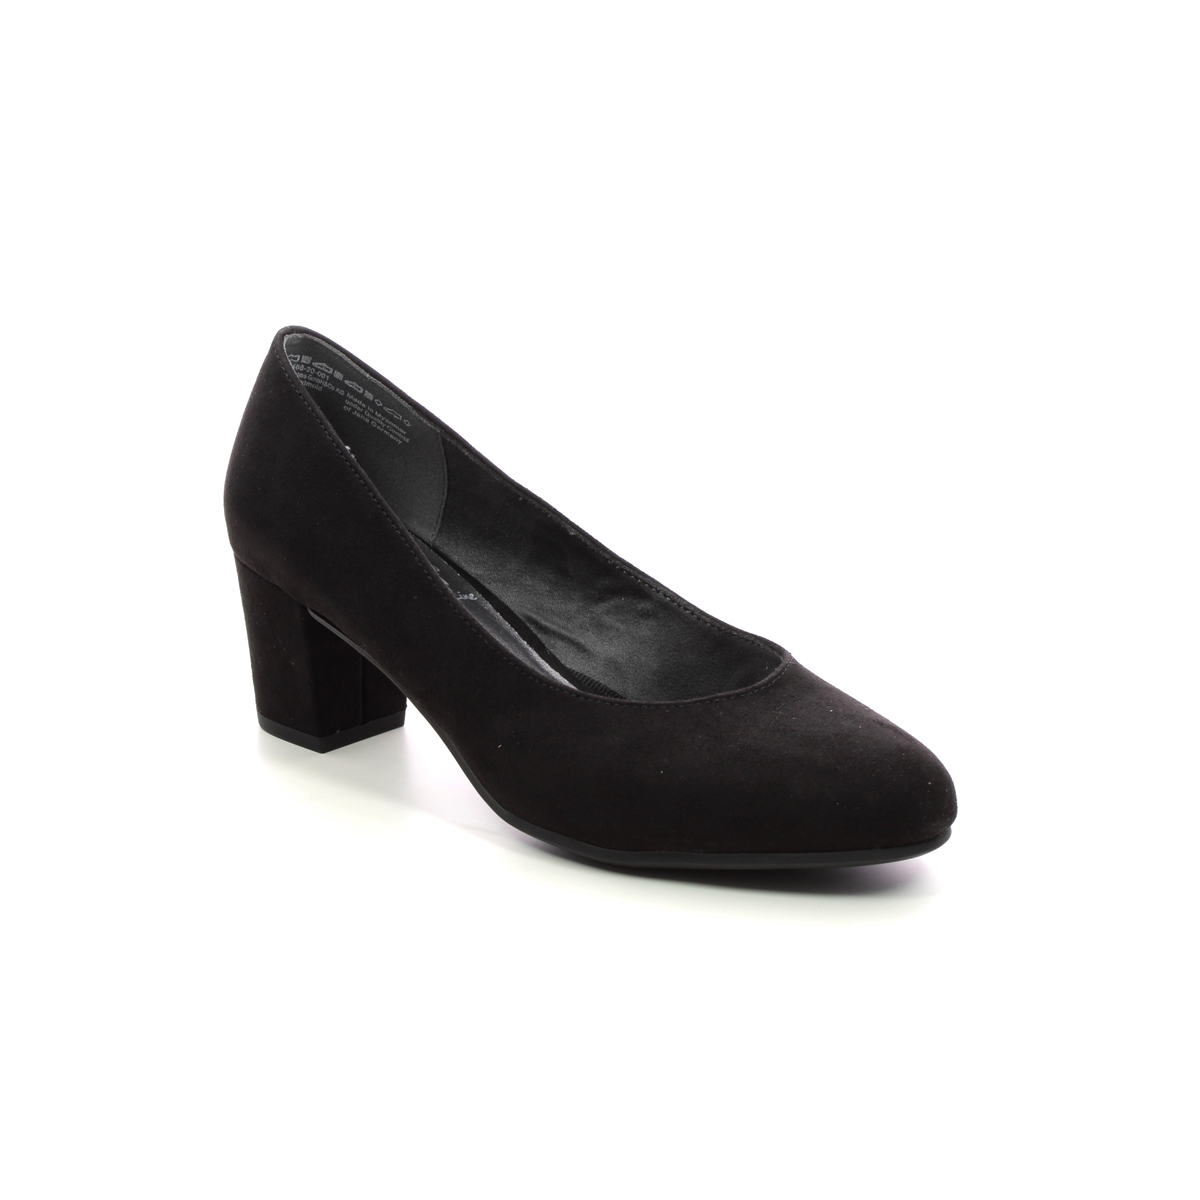 Jana Abuplain Wide Black Womens Court Shoes 22478-42-001 in a Plain Textile in Size 38